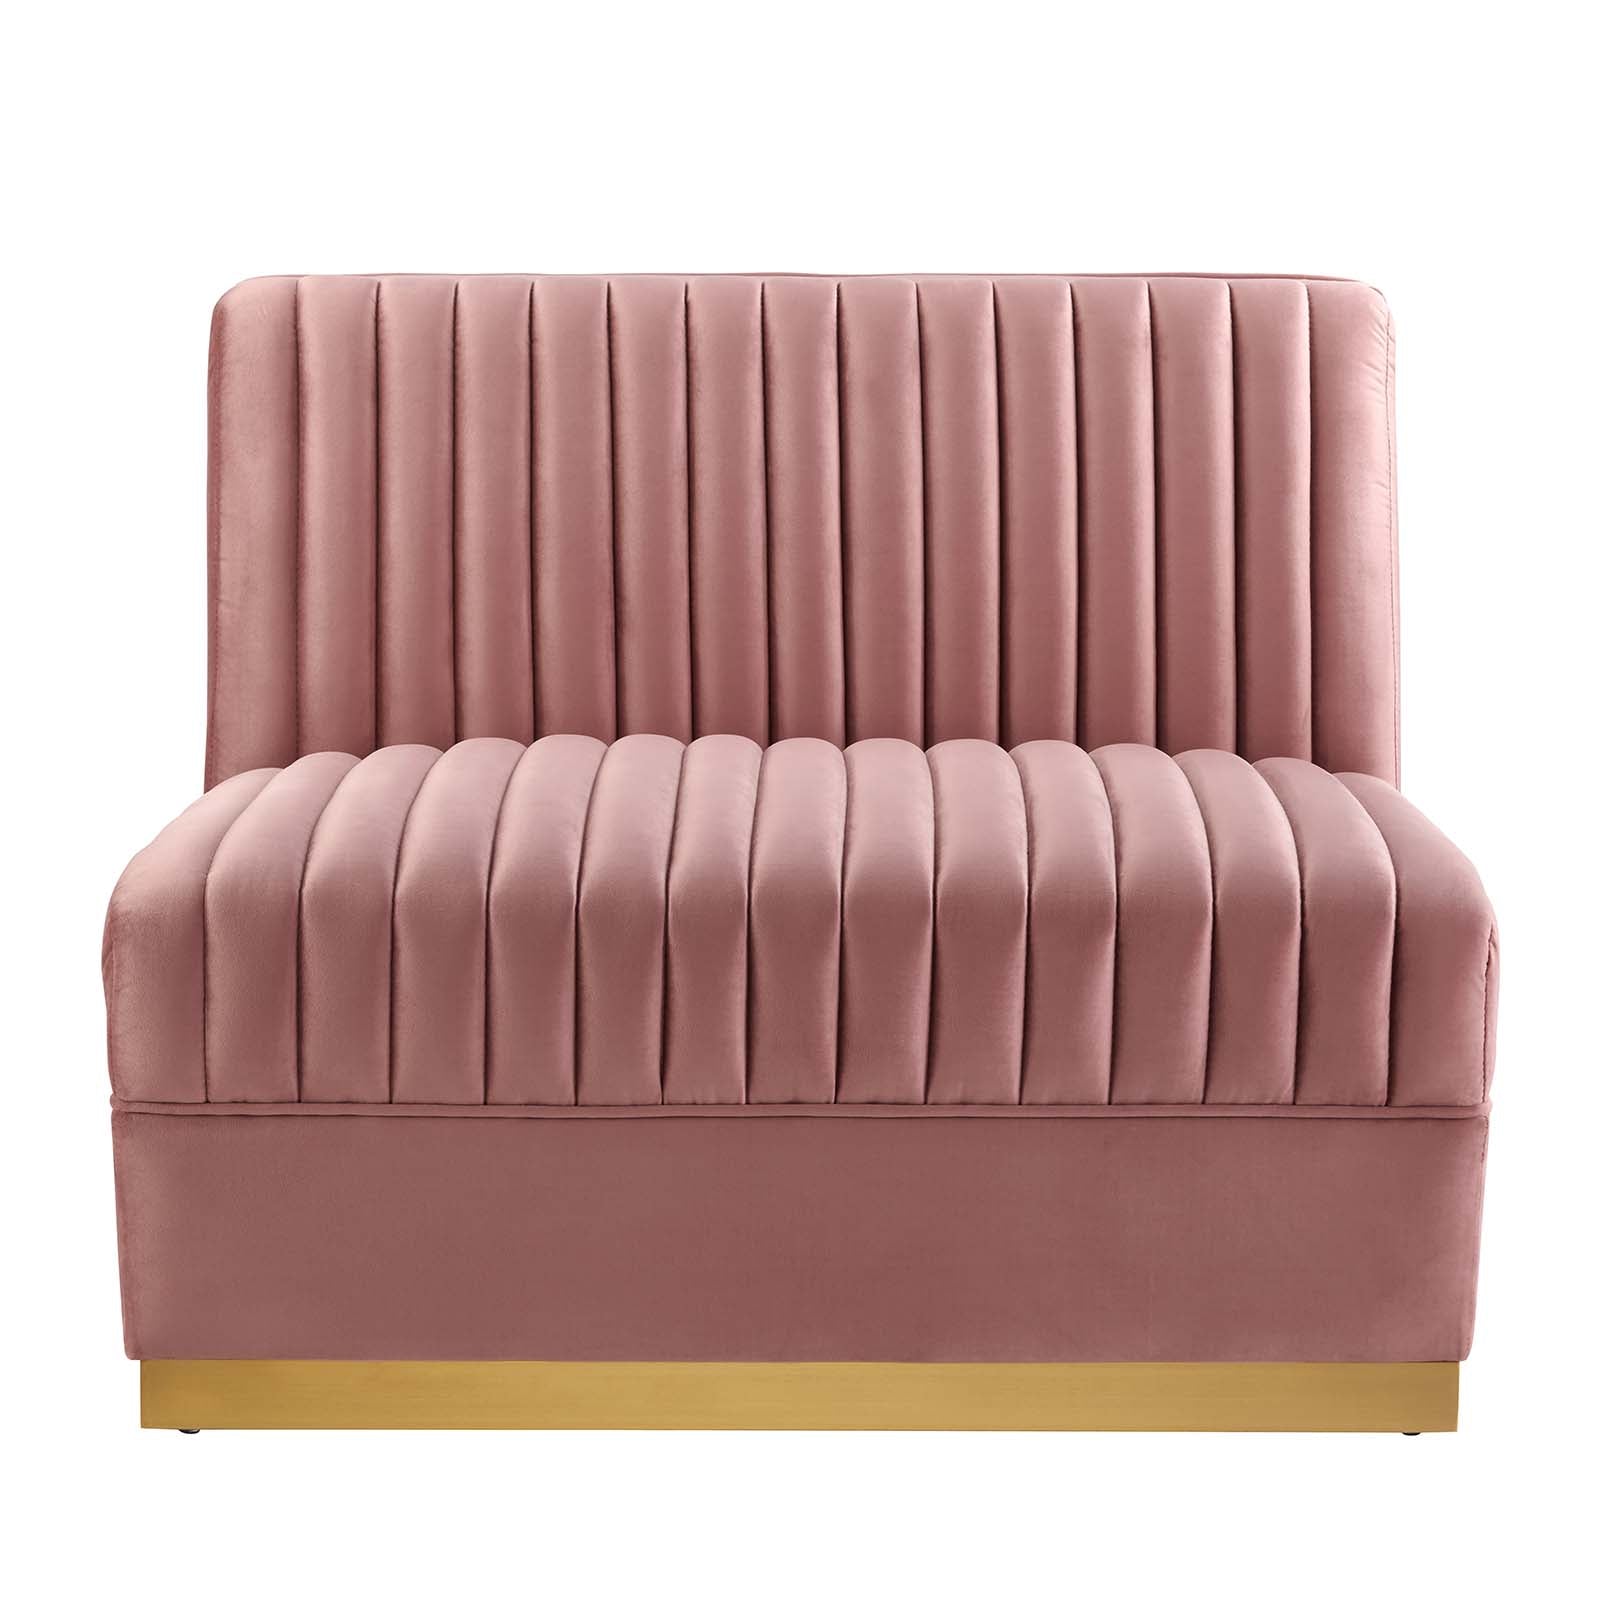 Modway Accent Chairs - Sanguine Channel Tufted Performance Velvet Modular Sectional Sofa Armless Chair Dusty Rose